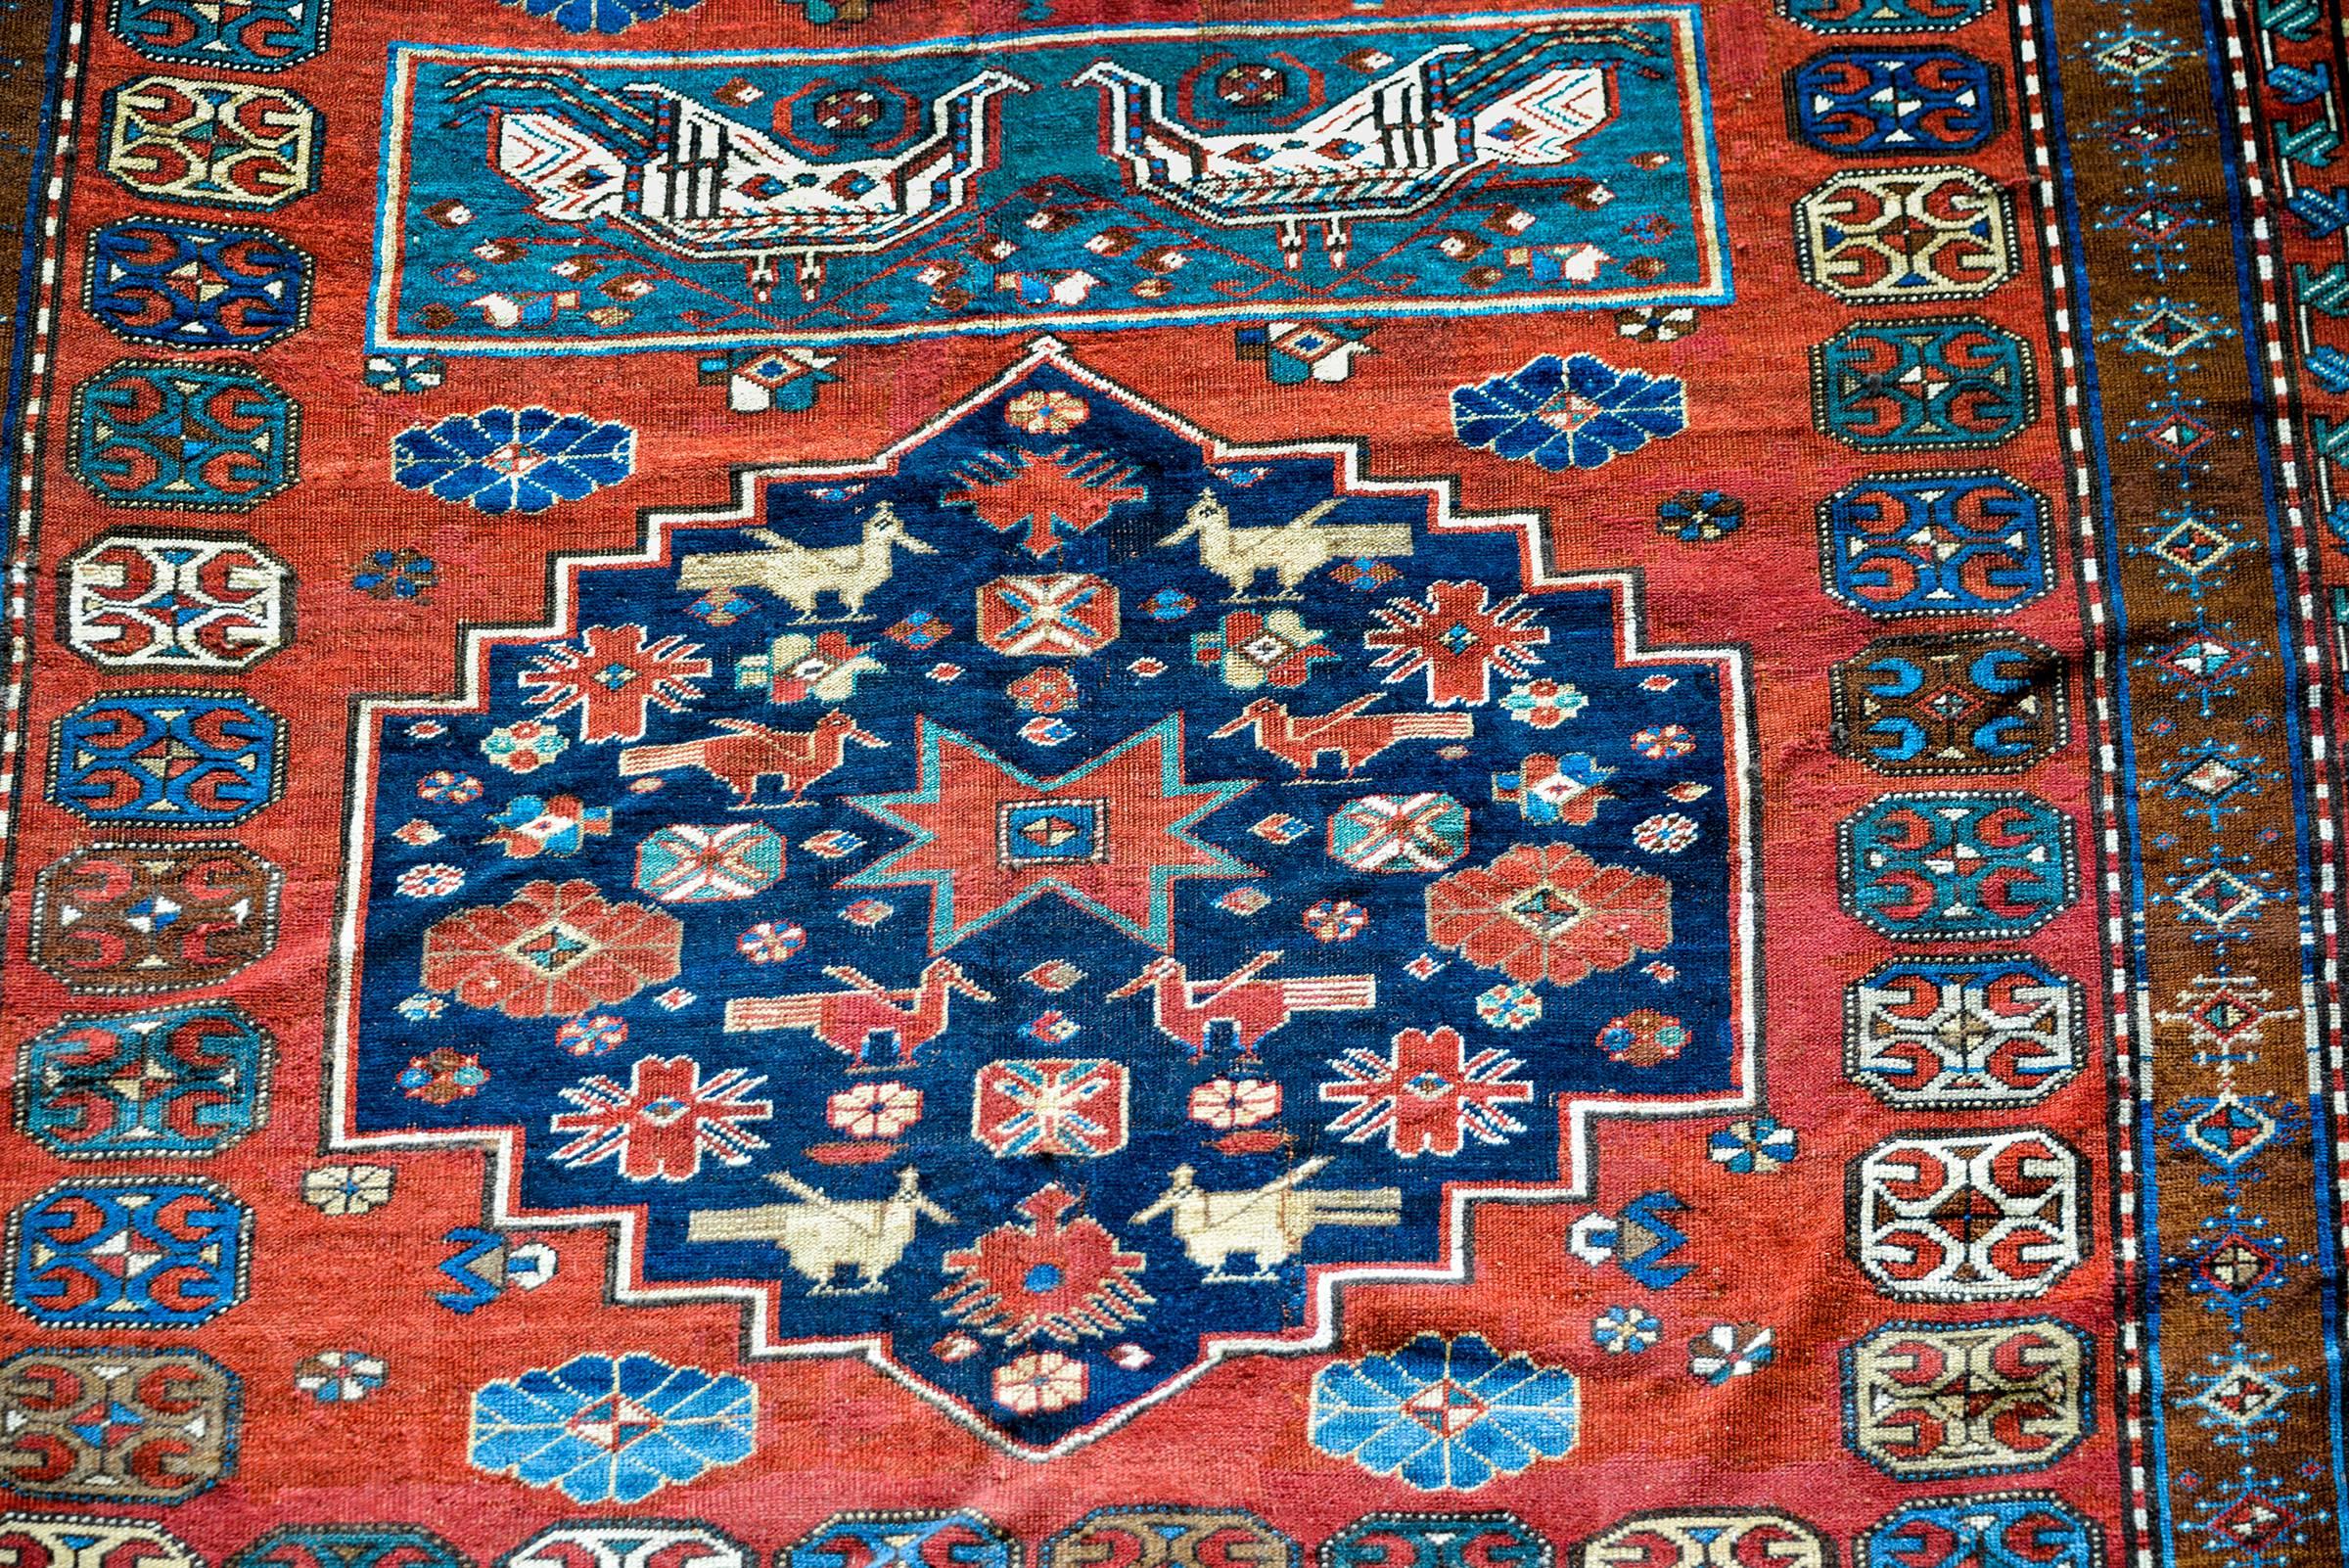 An extraordinary early 20th century Caucasian rug with a fantastically woven pattern consisting of three large diamond shaped medallions, two with dark indigo backgrounds, and one with white, with multicolored flowers and birds, on a rich deep